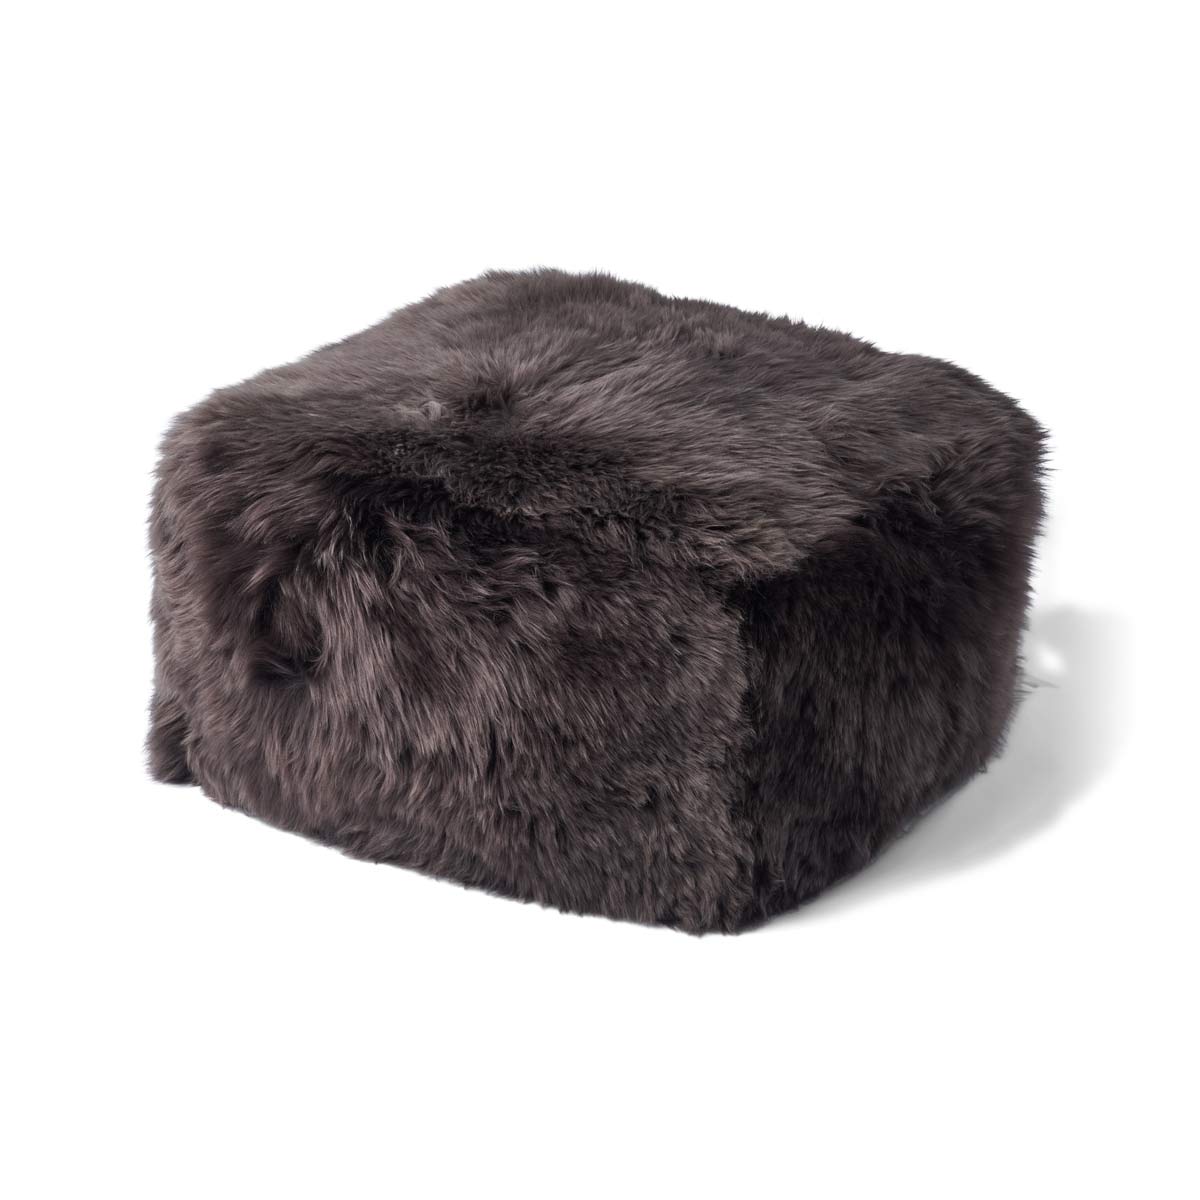 Premium Quality, New Zealand, Square Pouf, Long-Wool, with calf leather backing. Size: chocolate